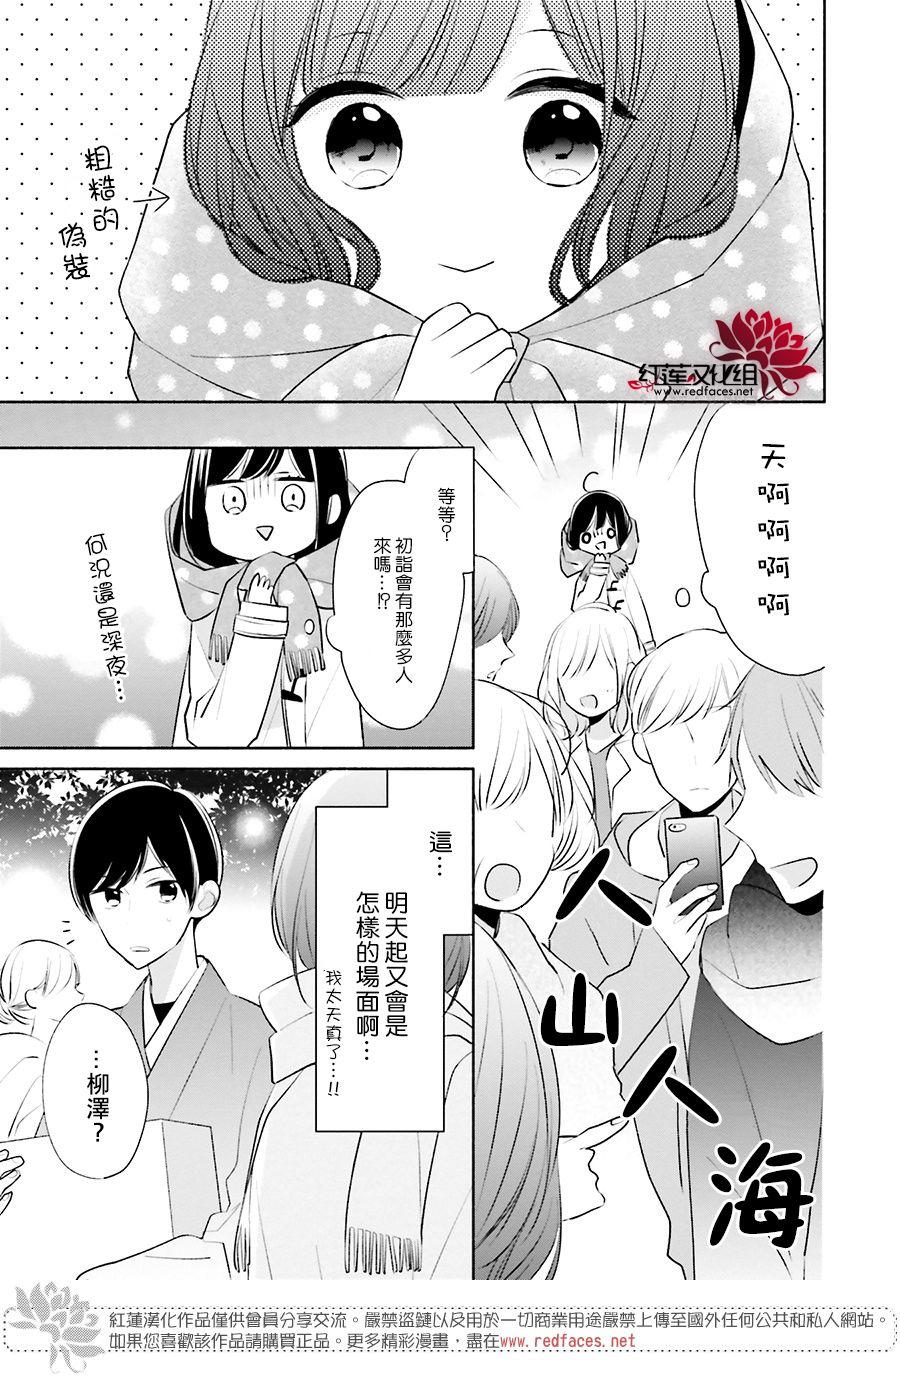 If given a second chance - 24話 - 3